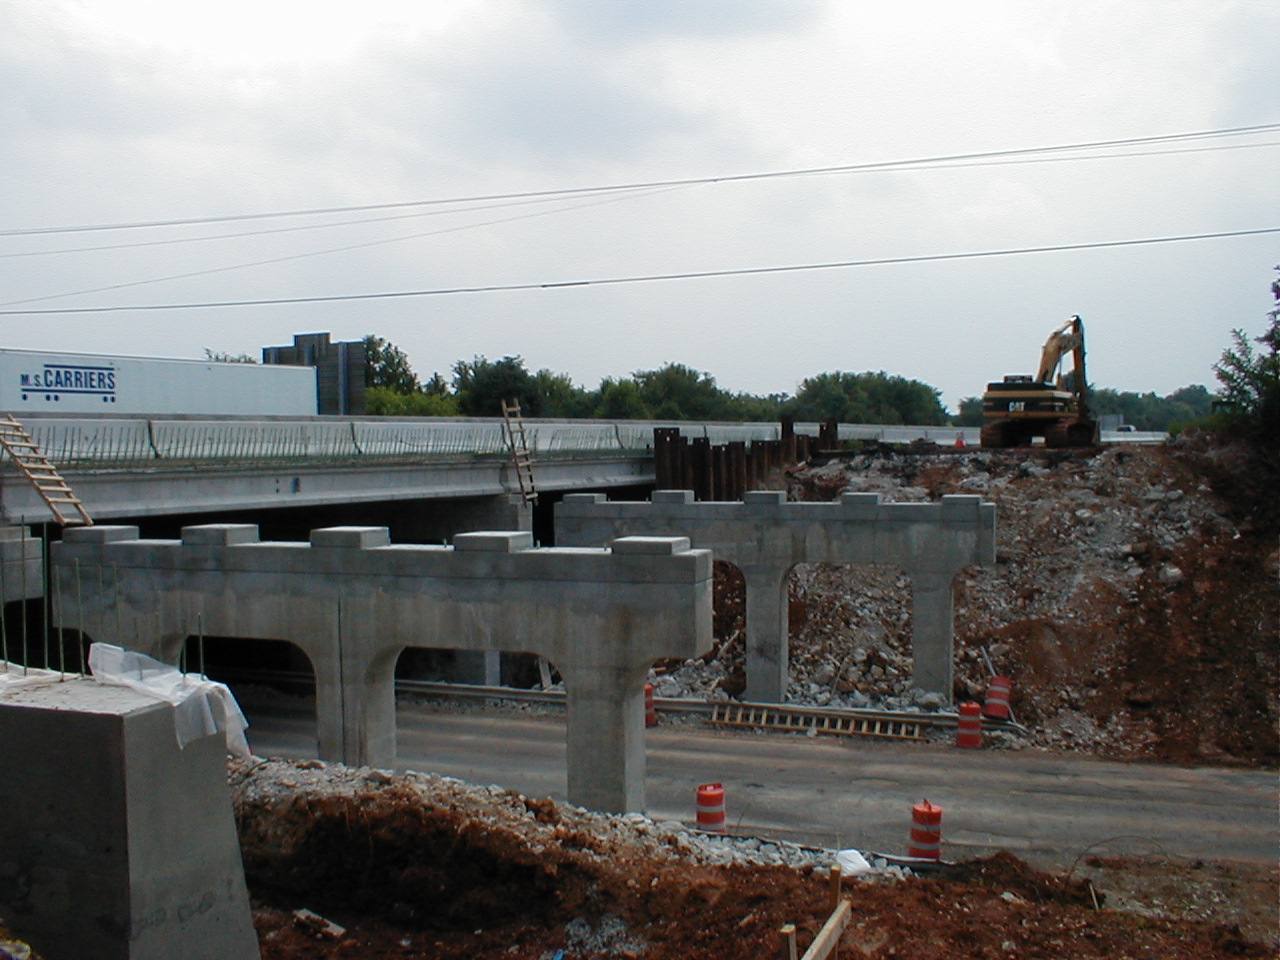 A view of the empty supports from the level of I-65.